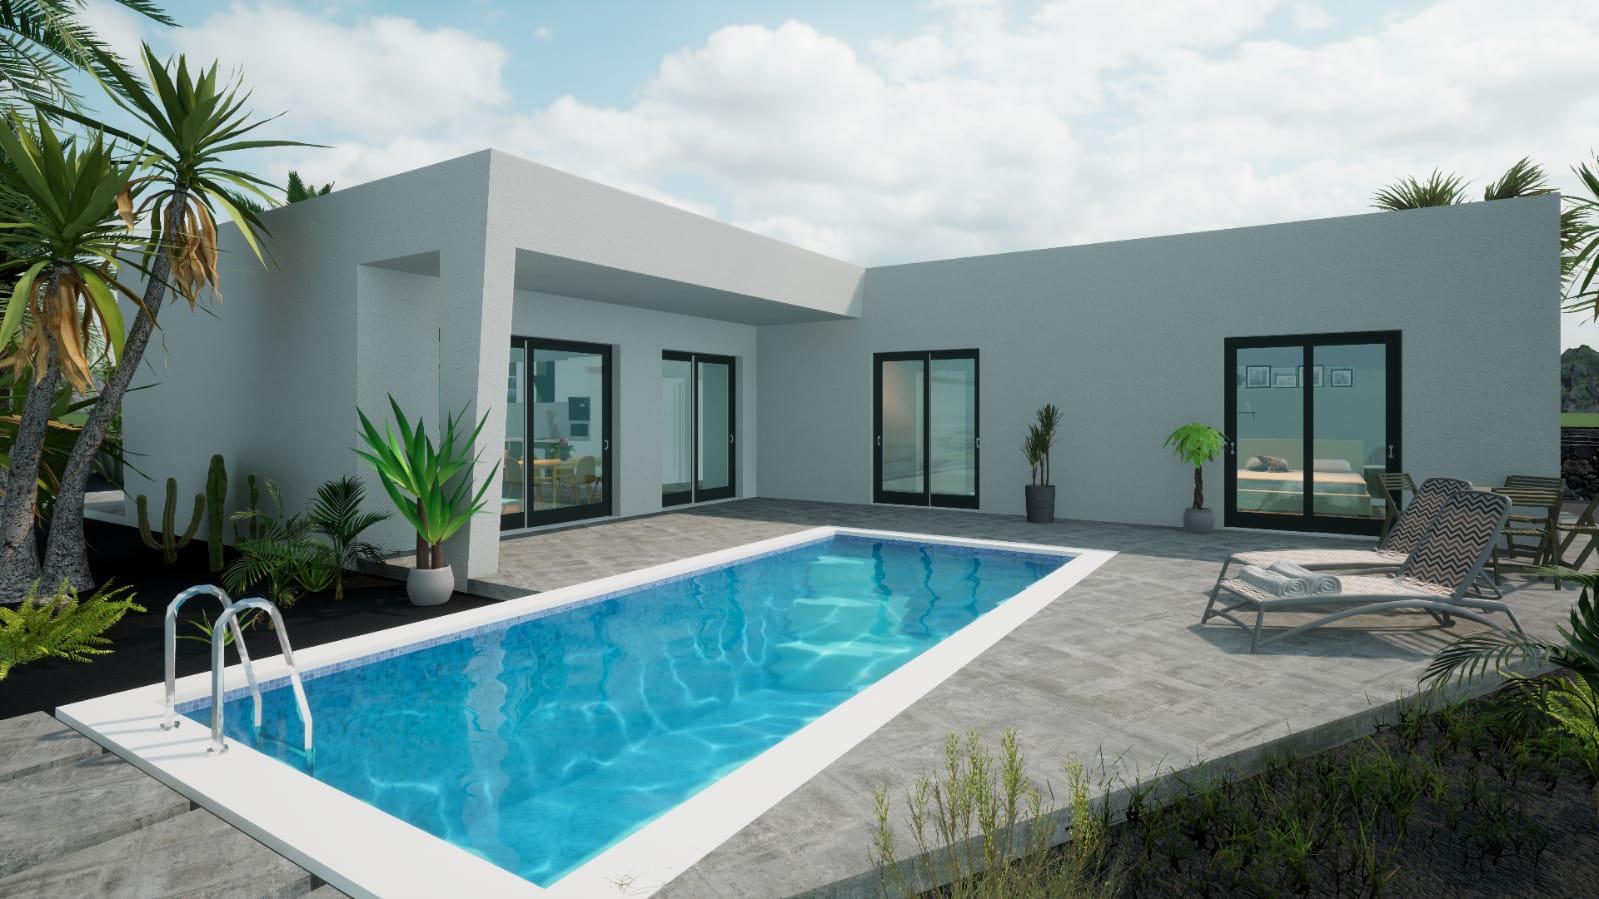 Unique Modern Minimalistic 3 Bedroom Detached Villa in Las Breñas With Private Pool and Stunning Views.